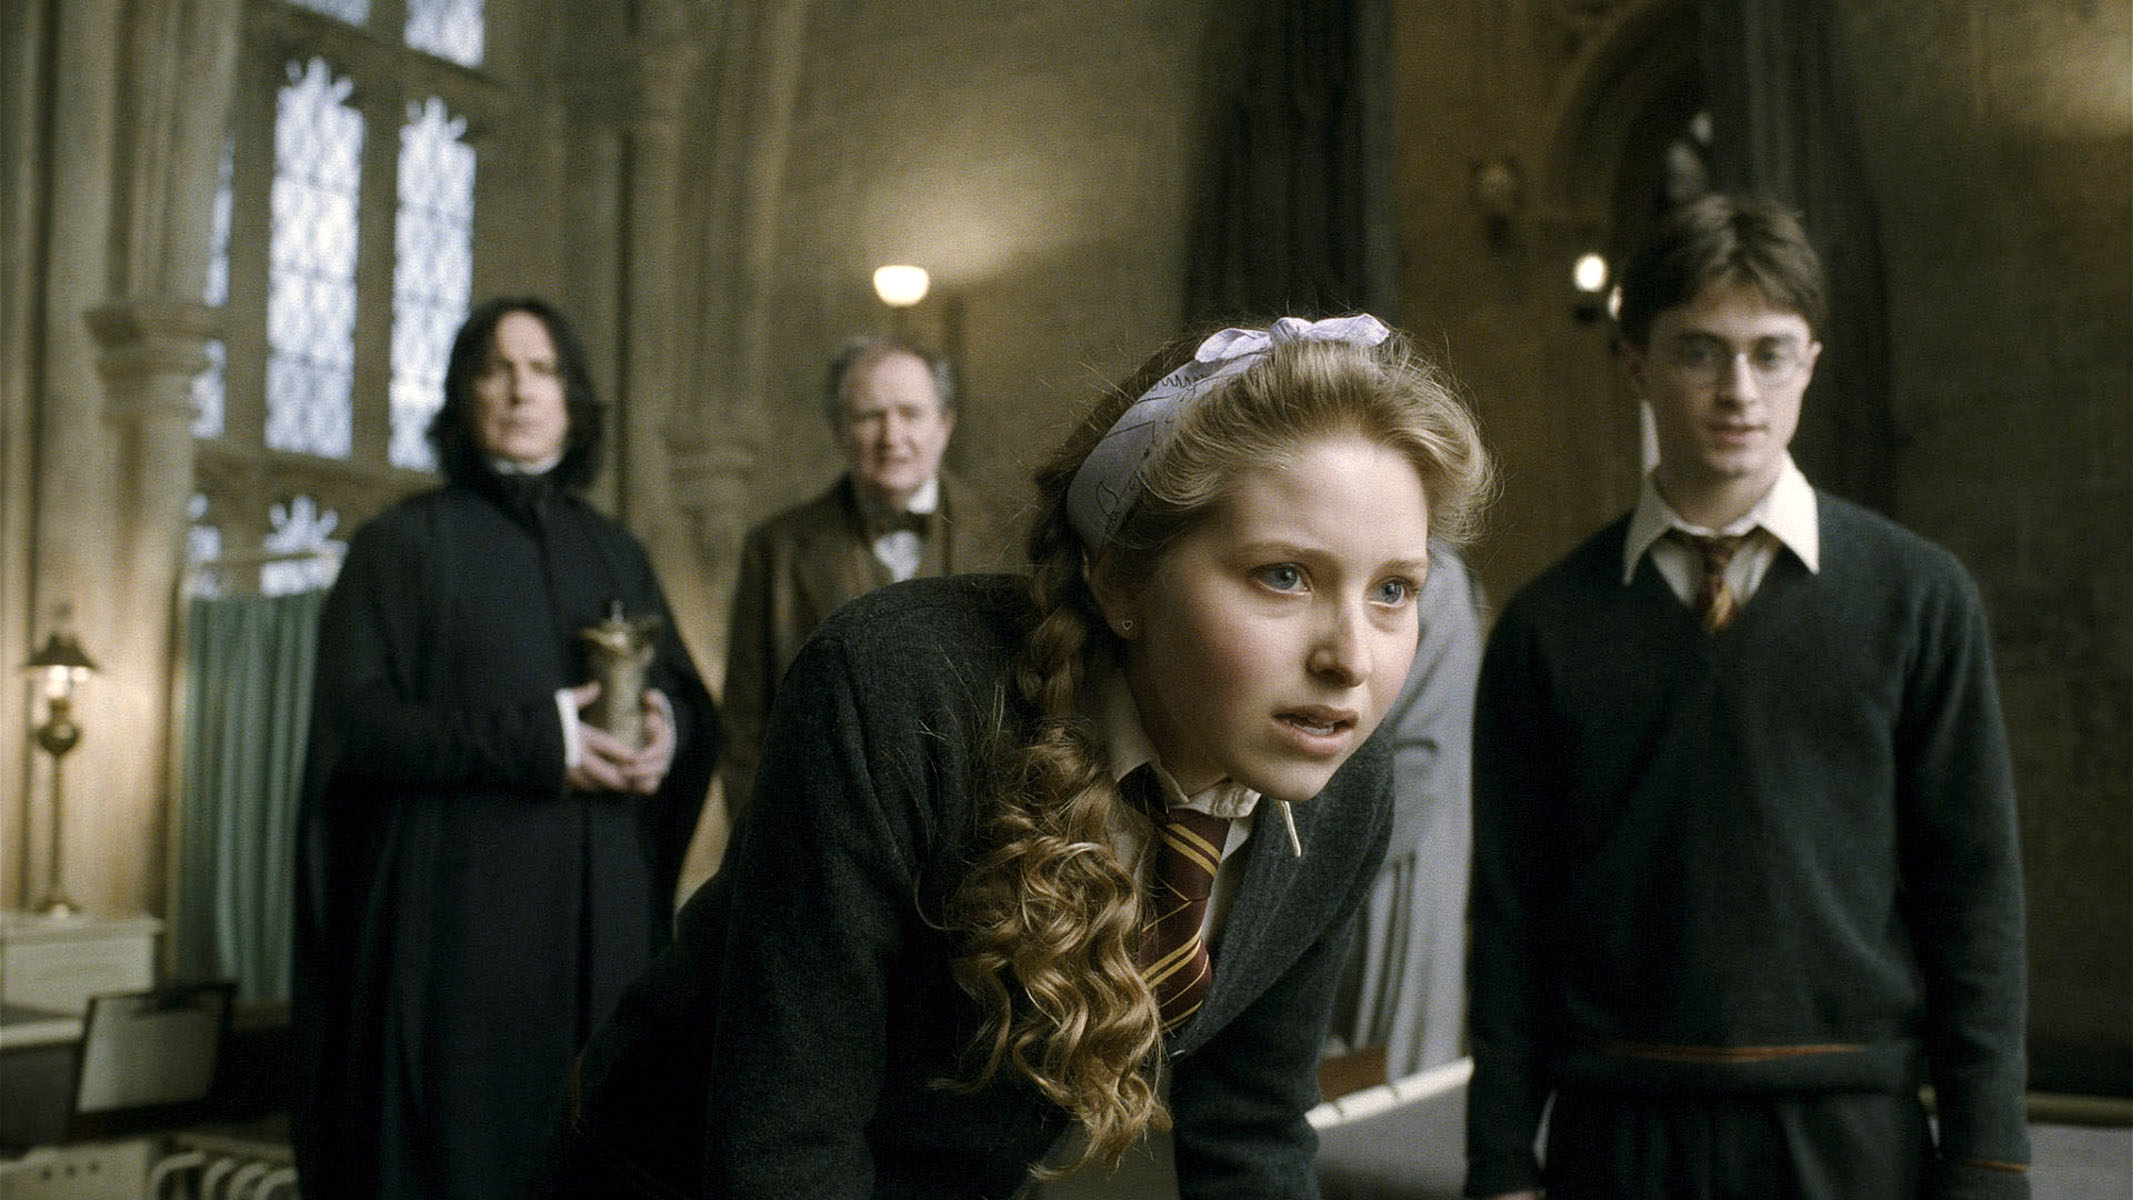 Snape, Lupin, Lavender, and Harry stand in the Hogwarts classroom, expressing concern